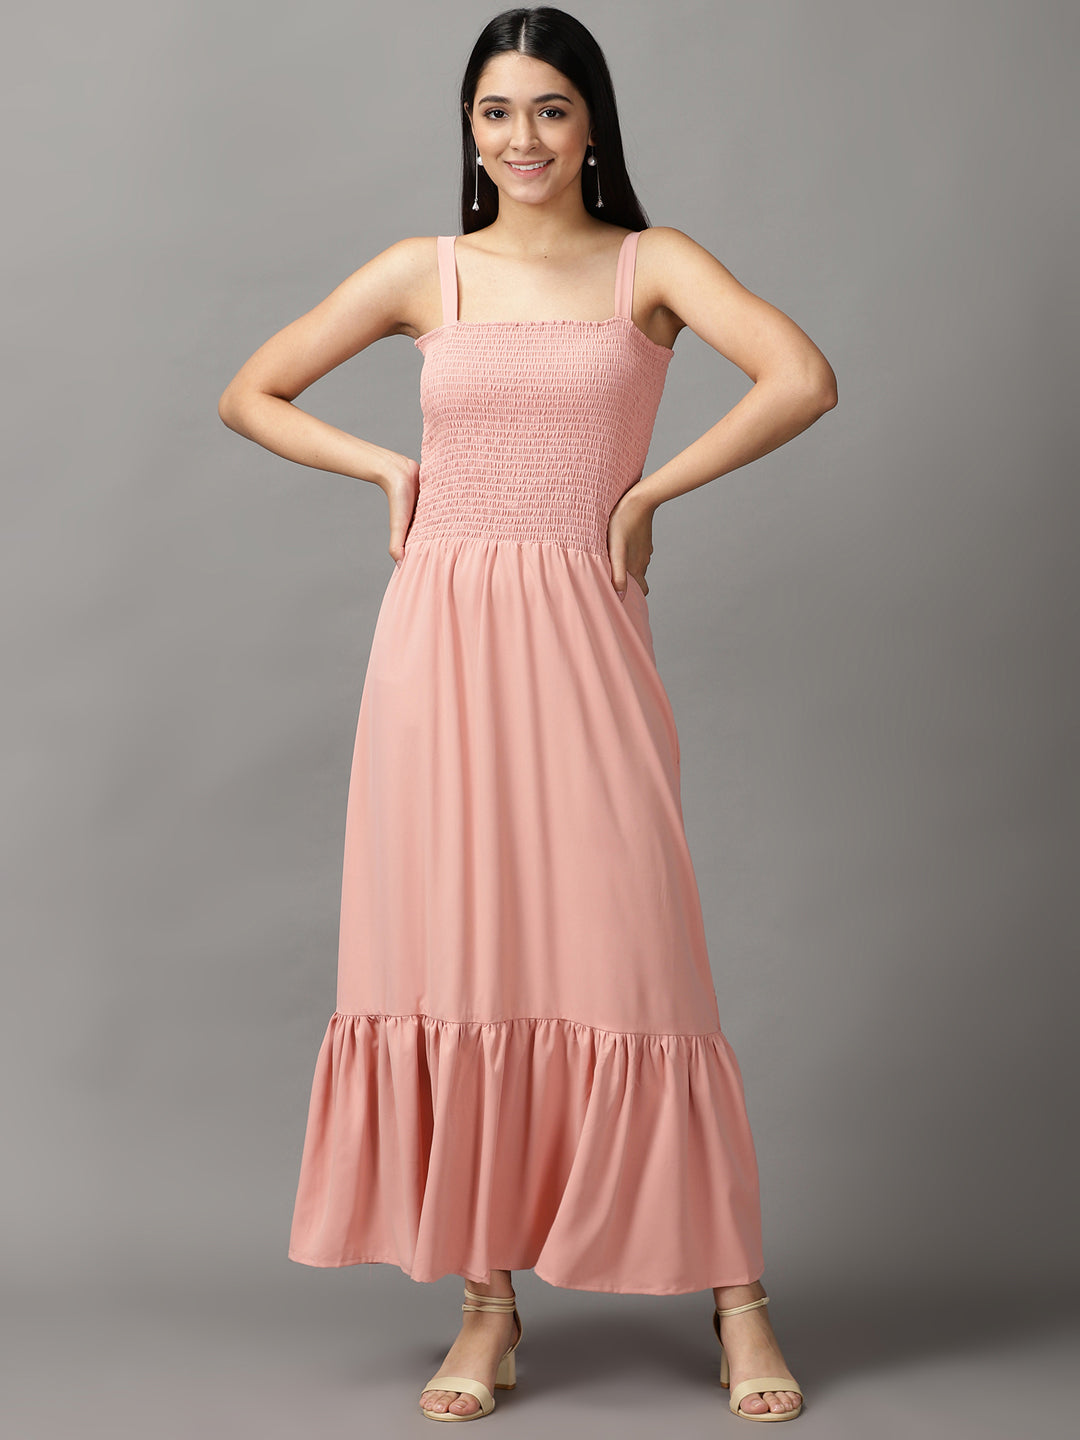 Women's Peach Solid Fit and Flare Dress